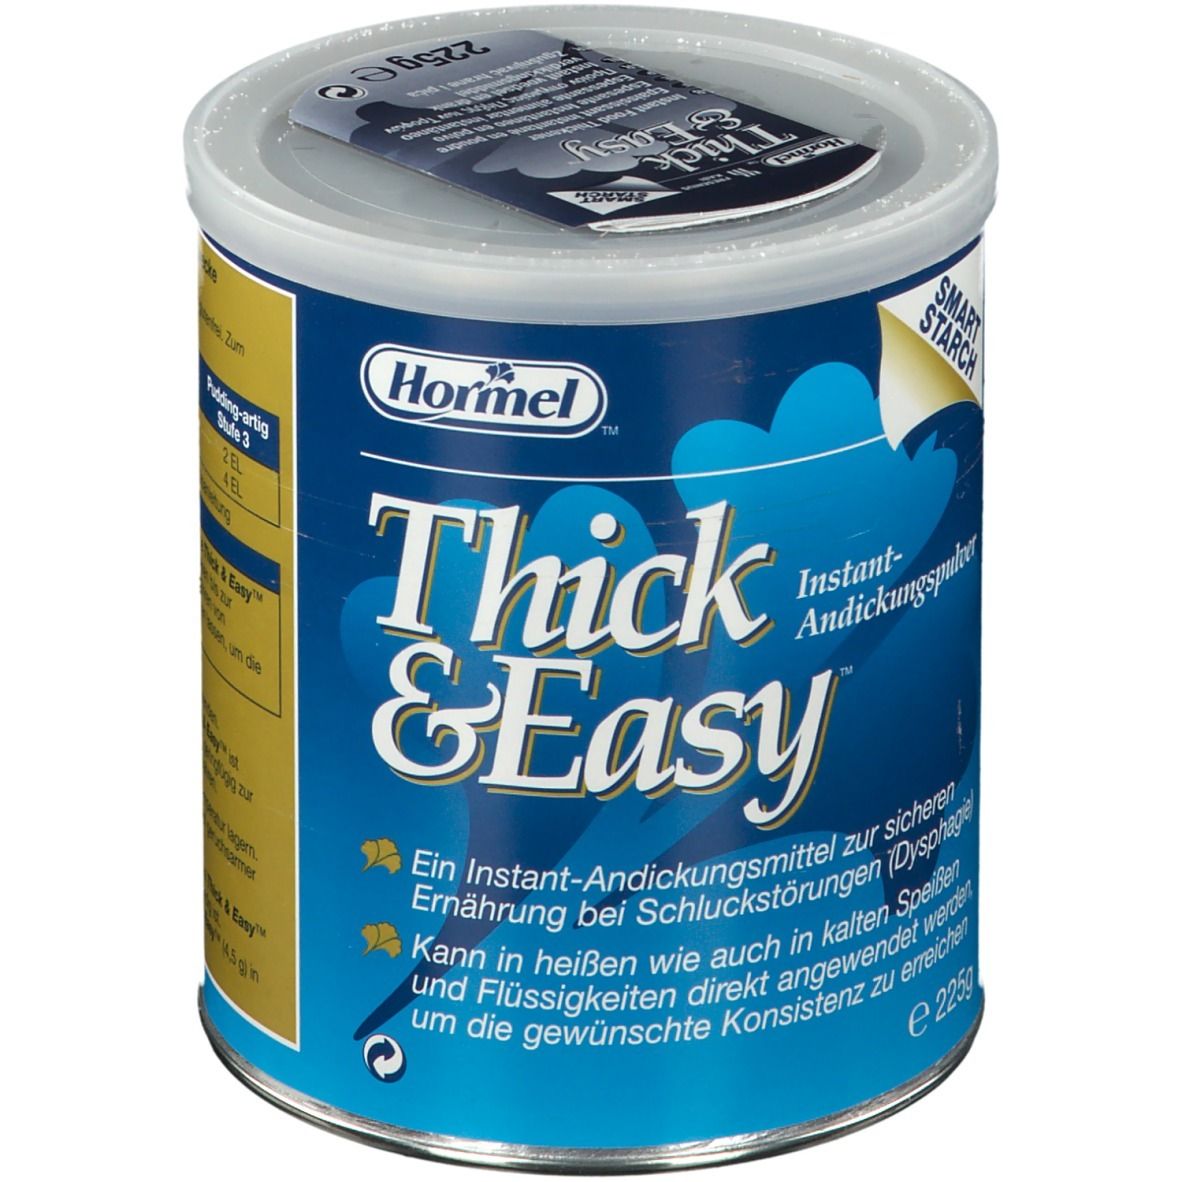 Image of Thick & Easy Instant Andickungspulver